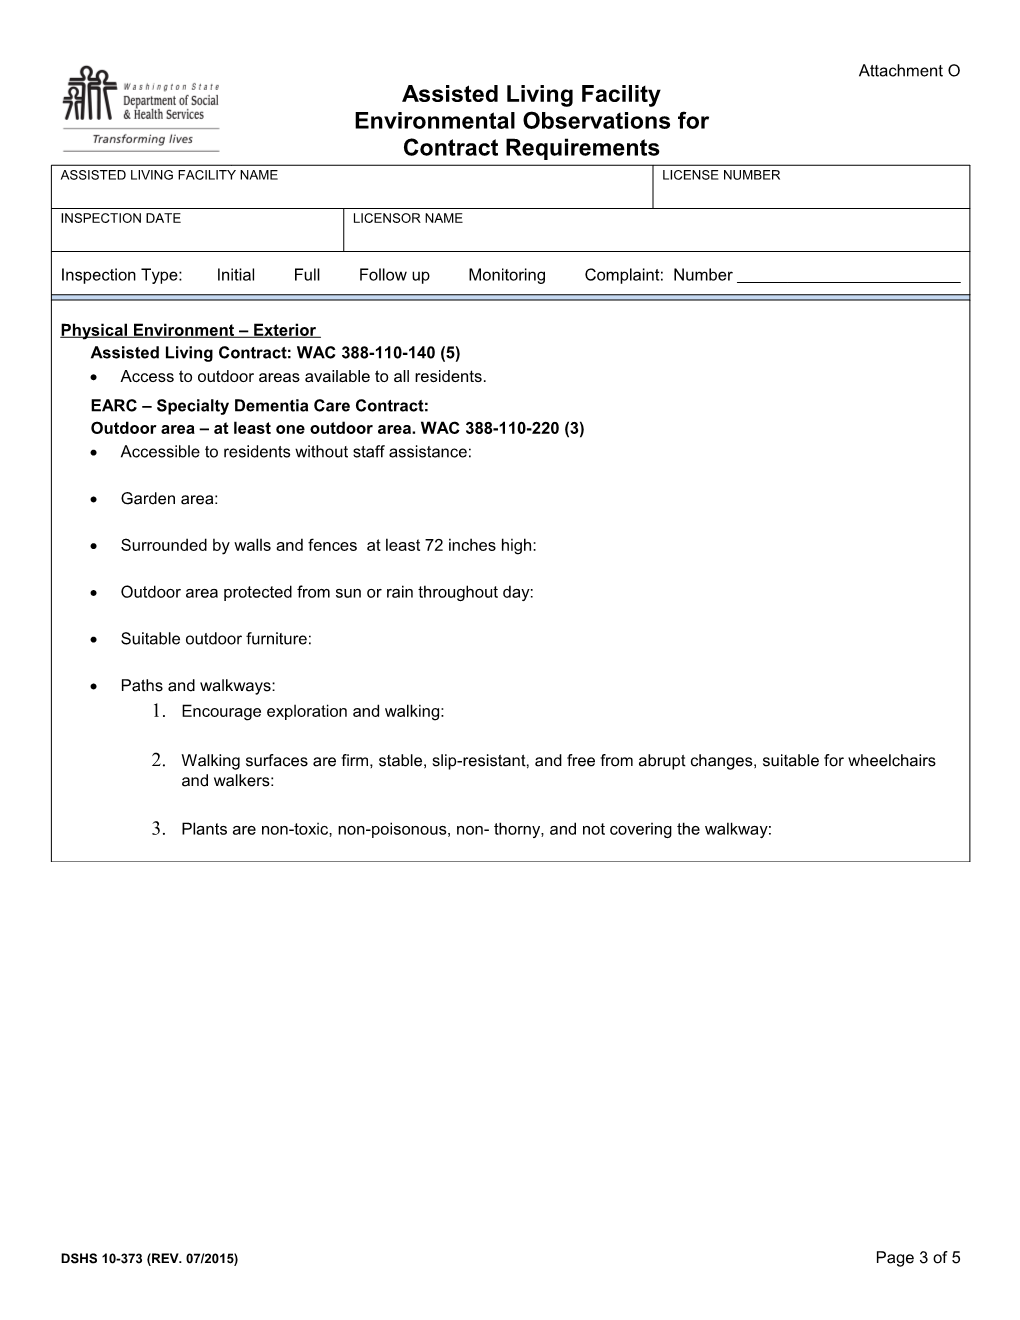 Assisted Living Facility Environmental Observations for Contract Requiements - Attachment O